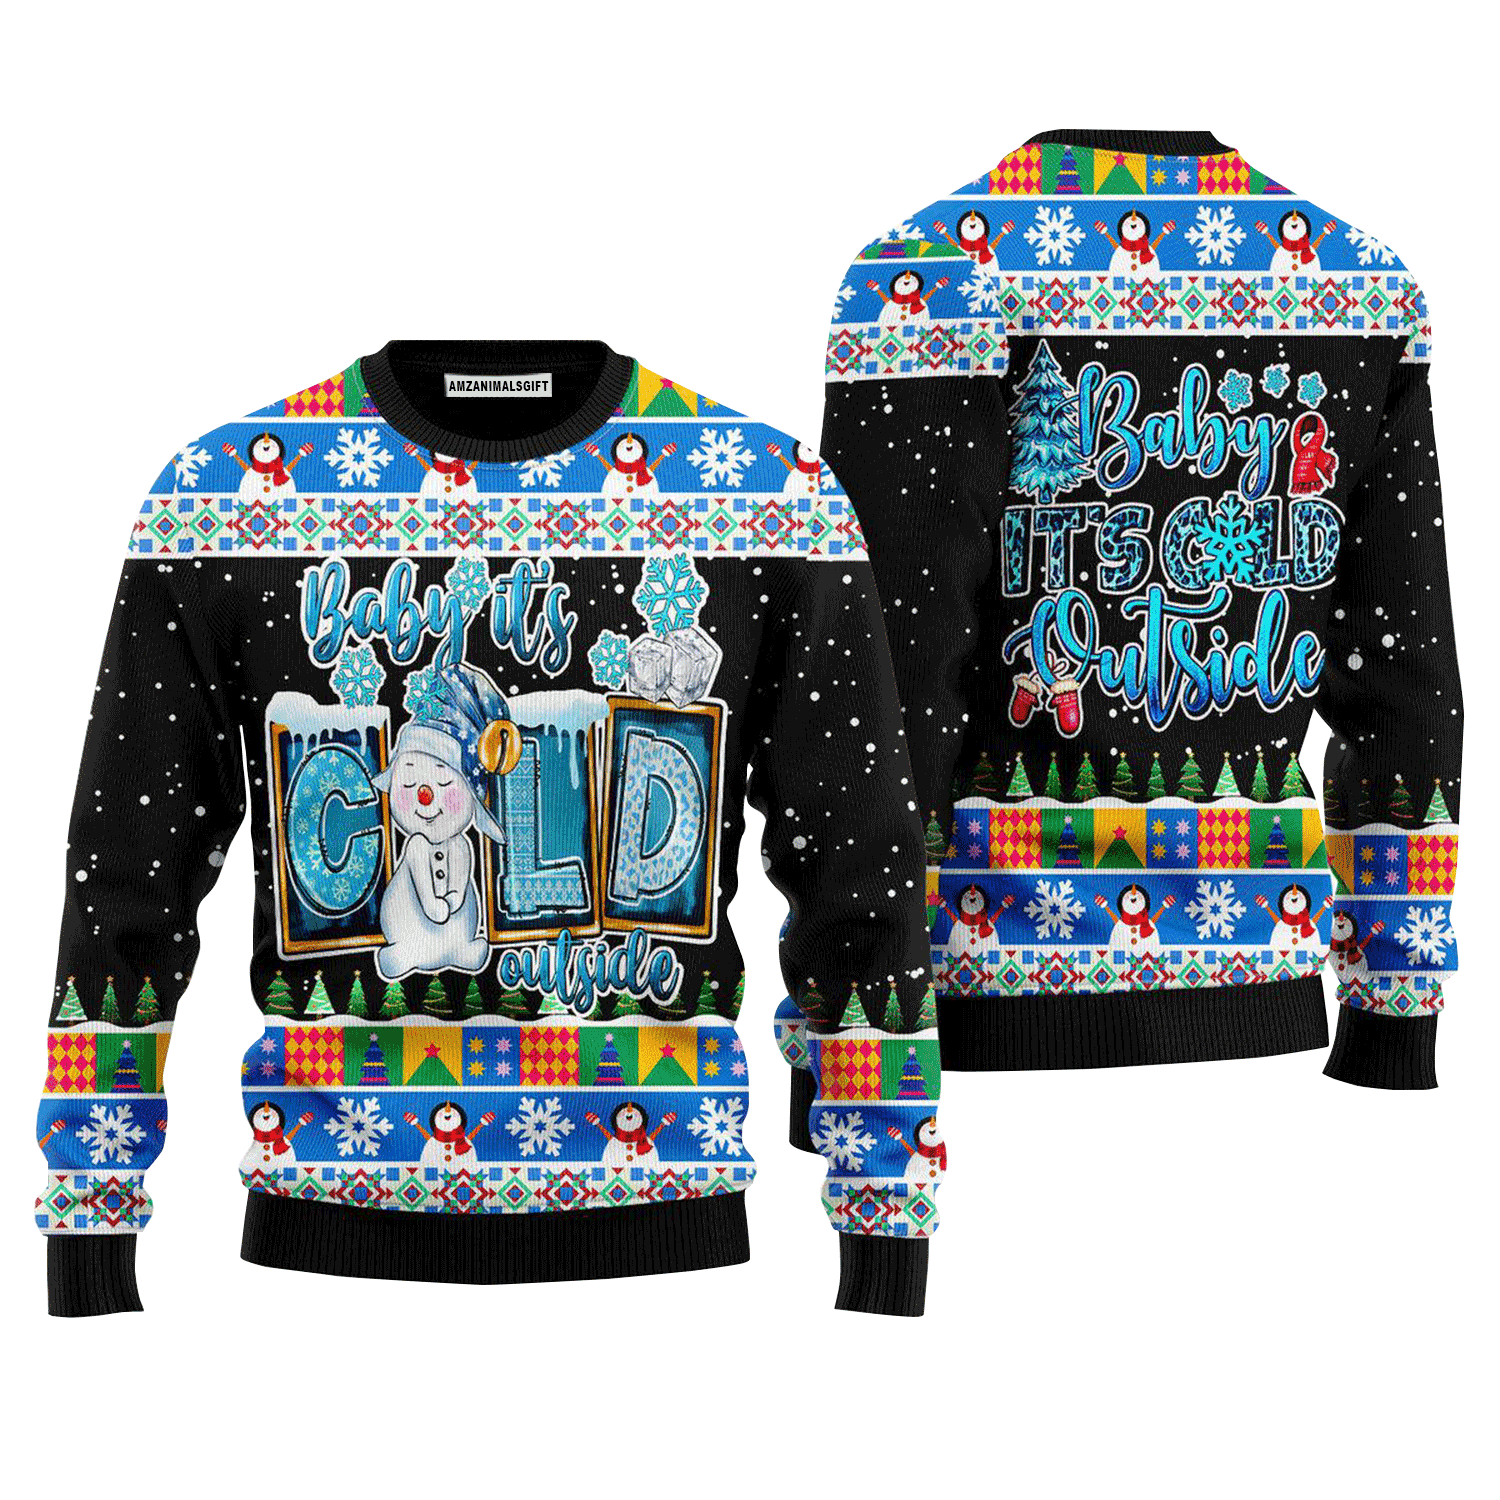 Baby It's Could Outside Sweater, Ugly Sweater For Men & Women, Perfect Outfit For Christmas New Year Autumn Winter